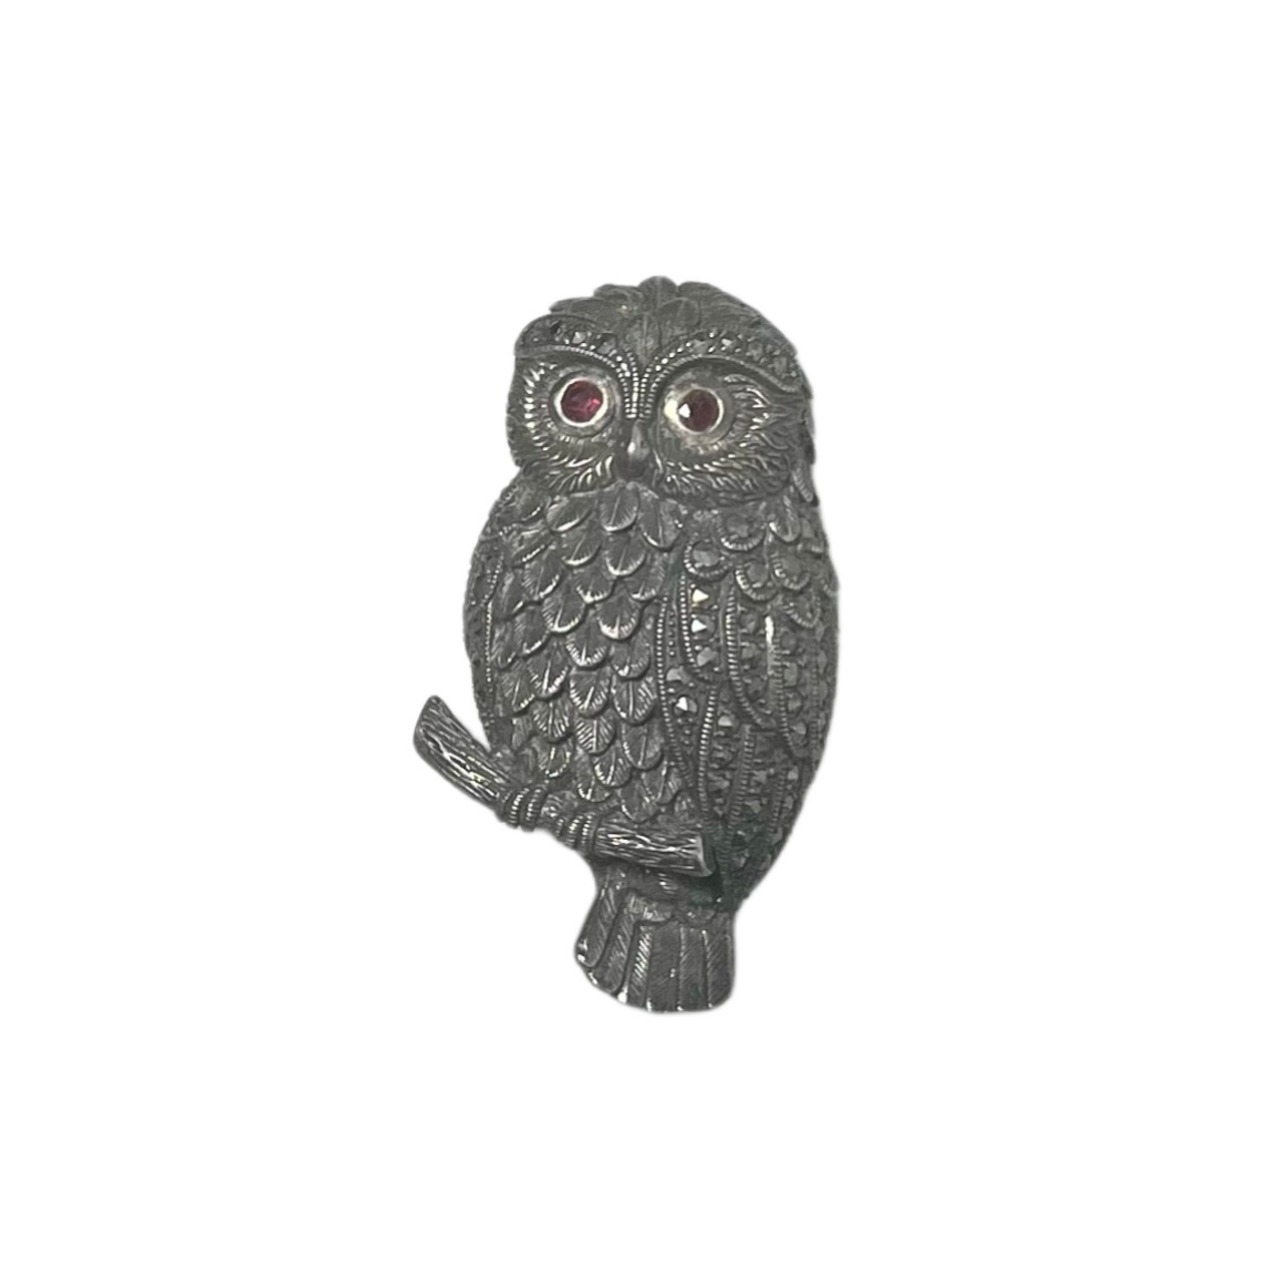 ROKUZAN silver brooch “owl” set with ruby & marcasite